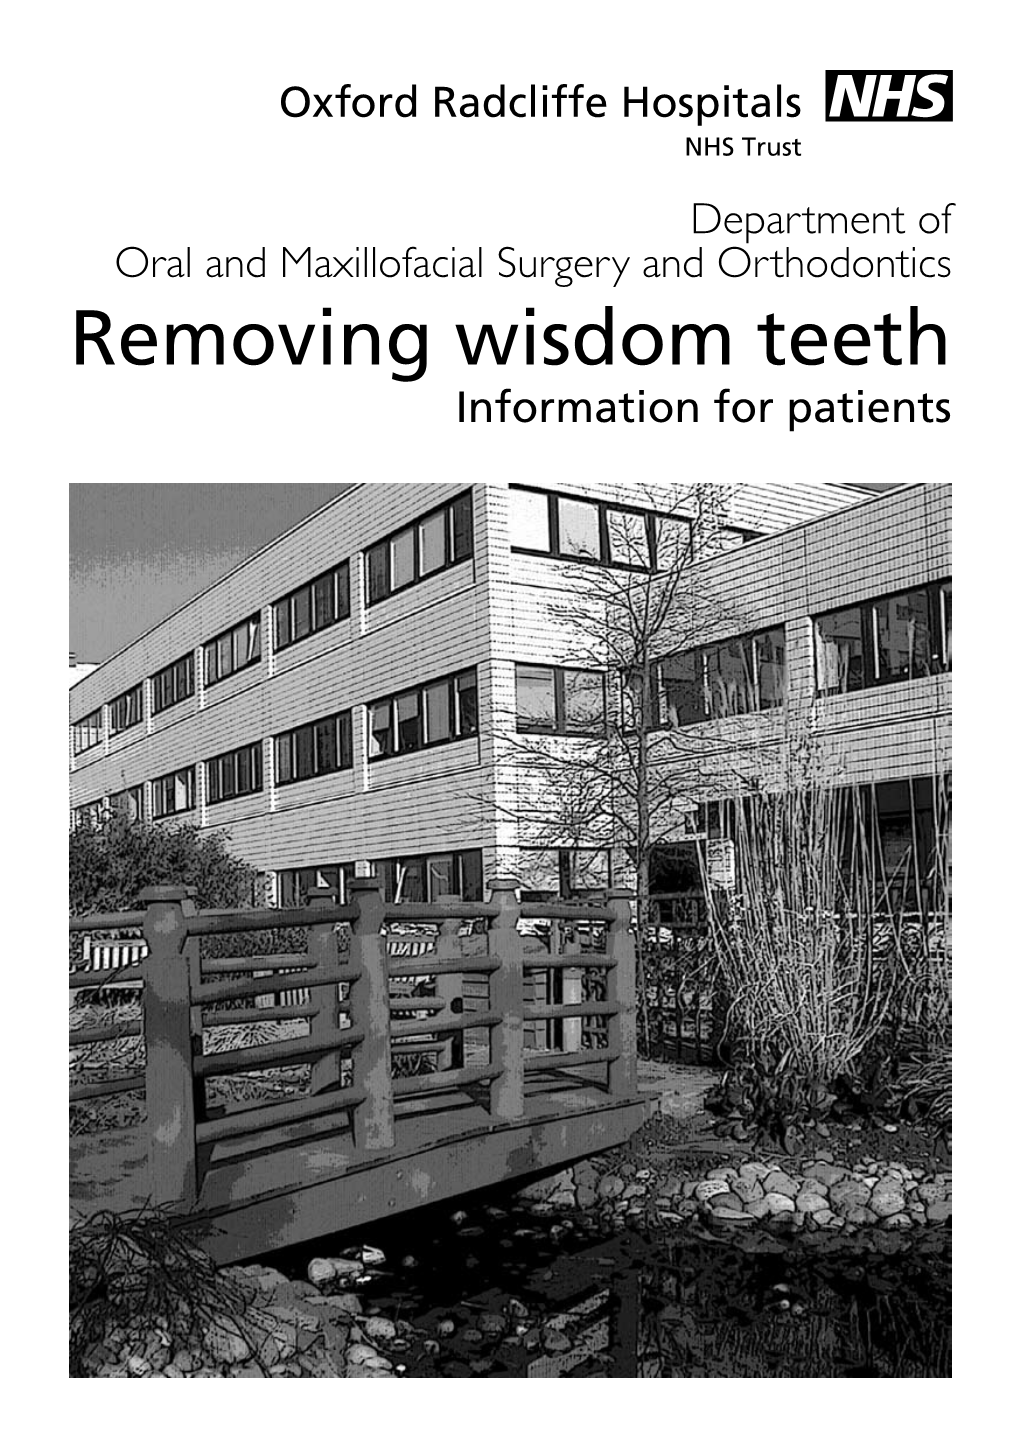 Removing Wisdom Teeth Information for Patients the Information in This Leaflet Will Help You to Understand Your Treatment